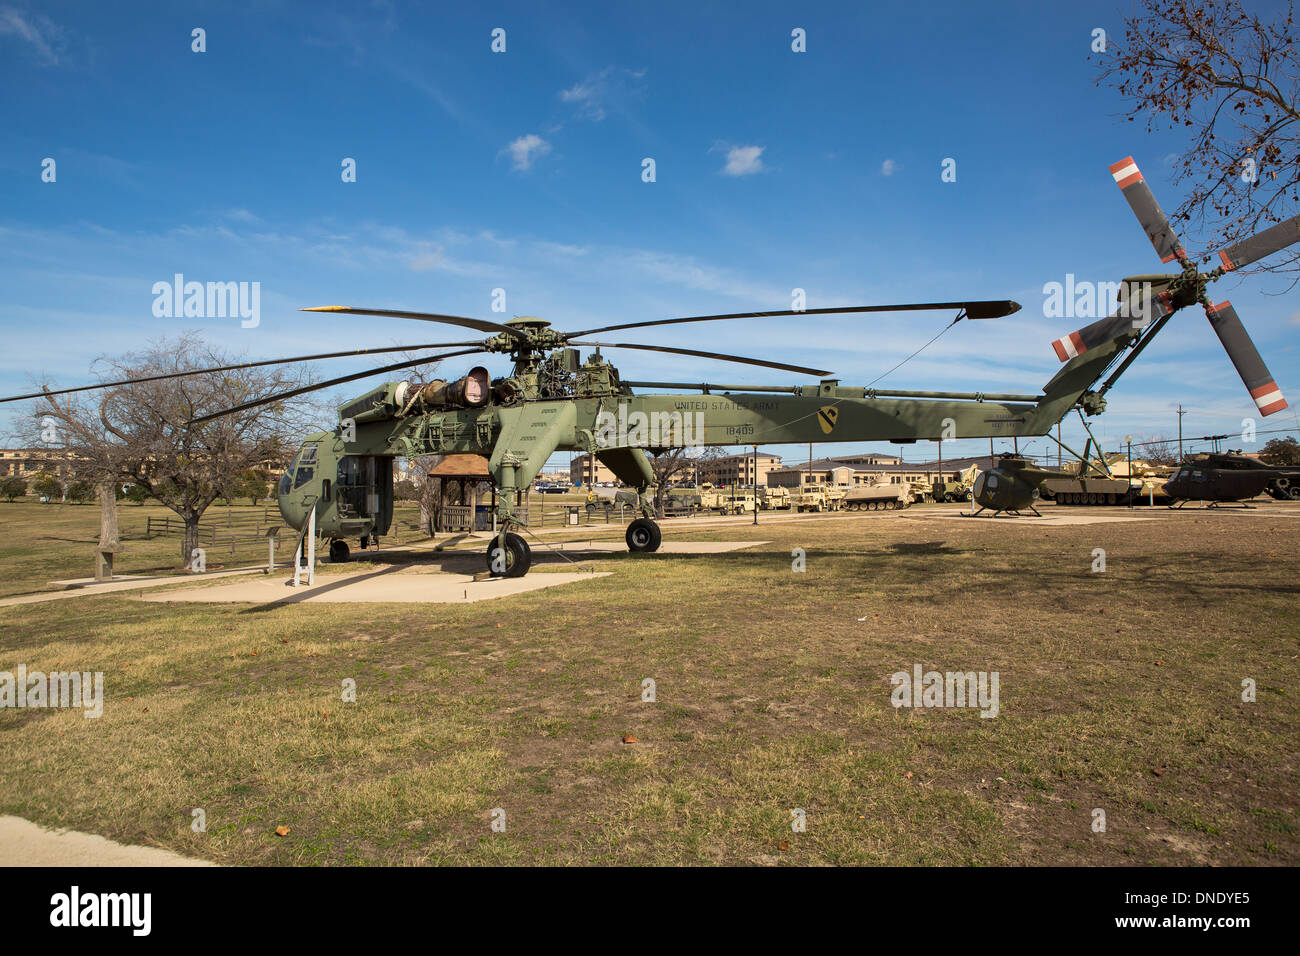 1st Cavalry Division Museum, Ft Hood, Texas Stock Photo, Royalty Free Image: 64845821 ...1300 x 956